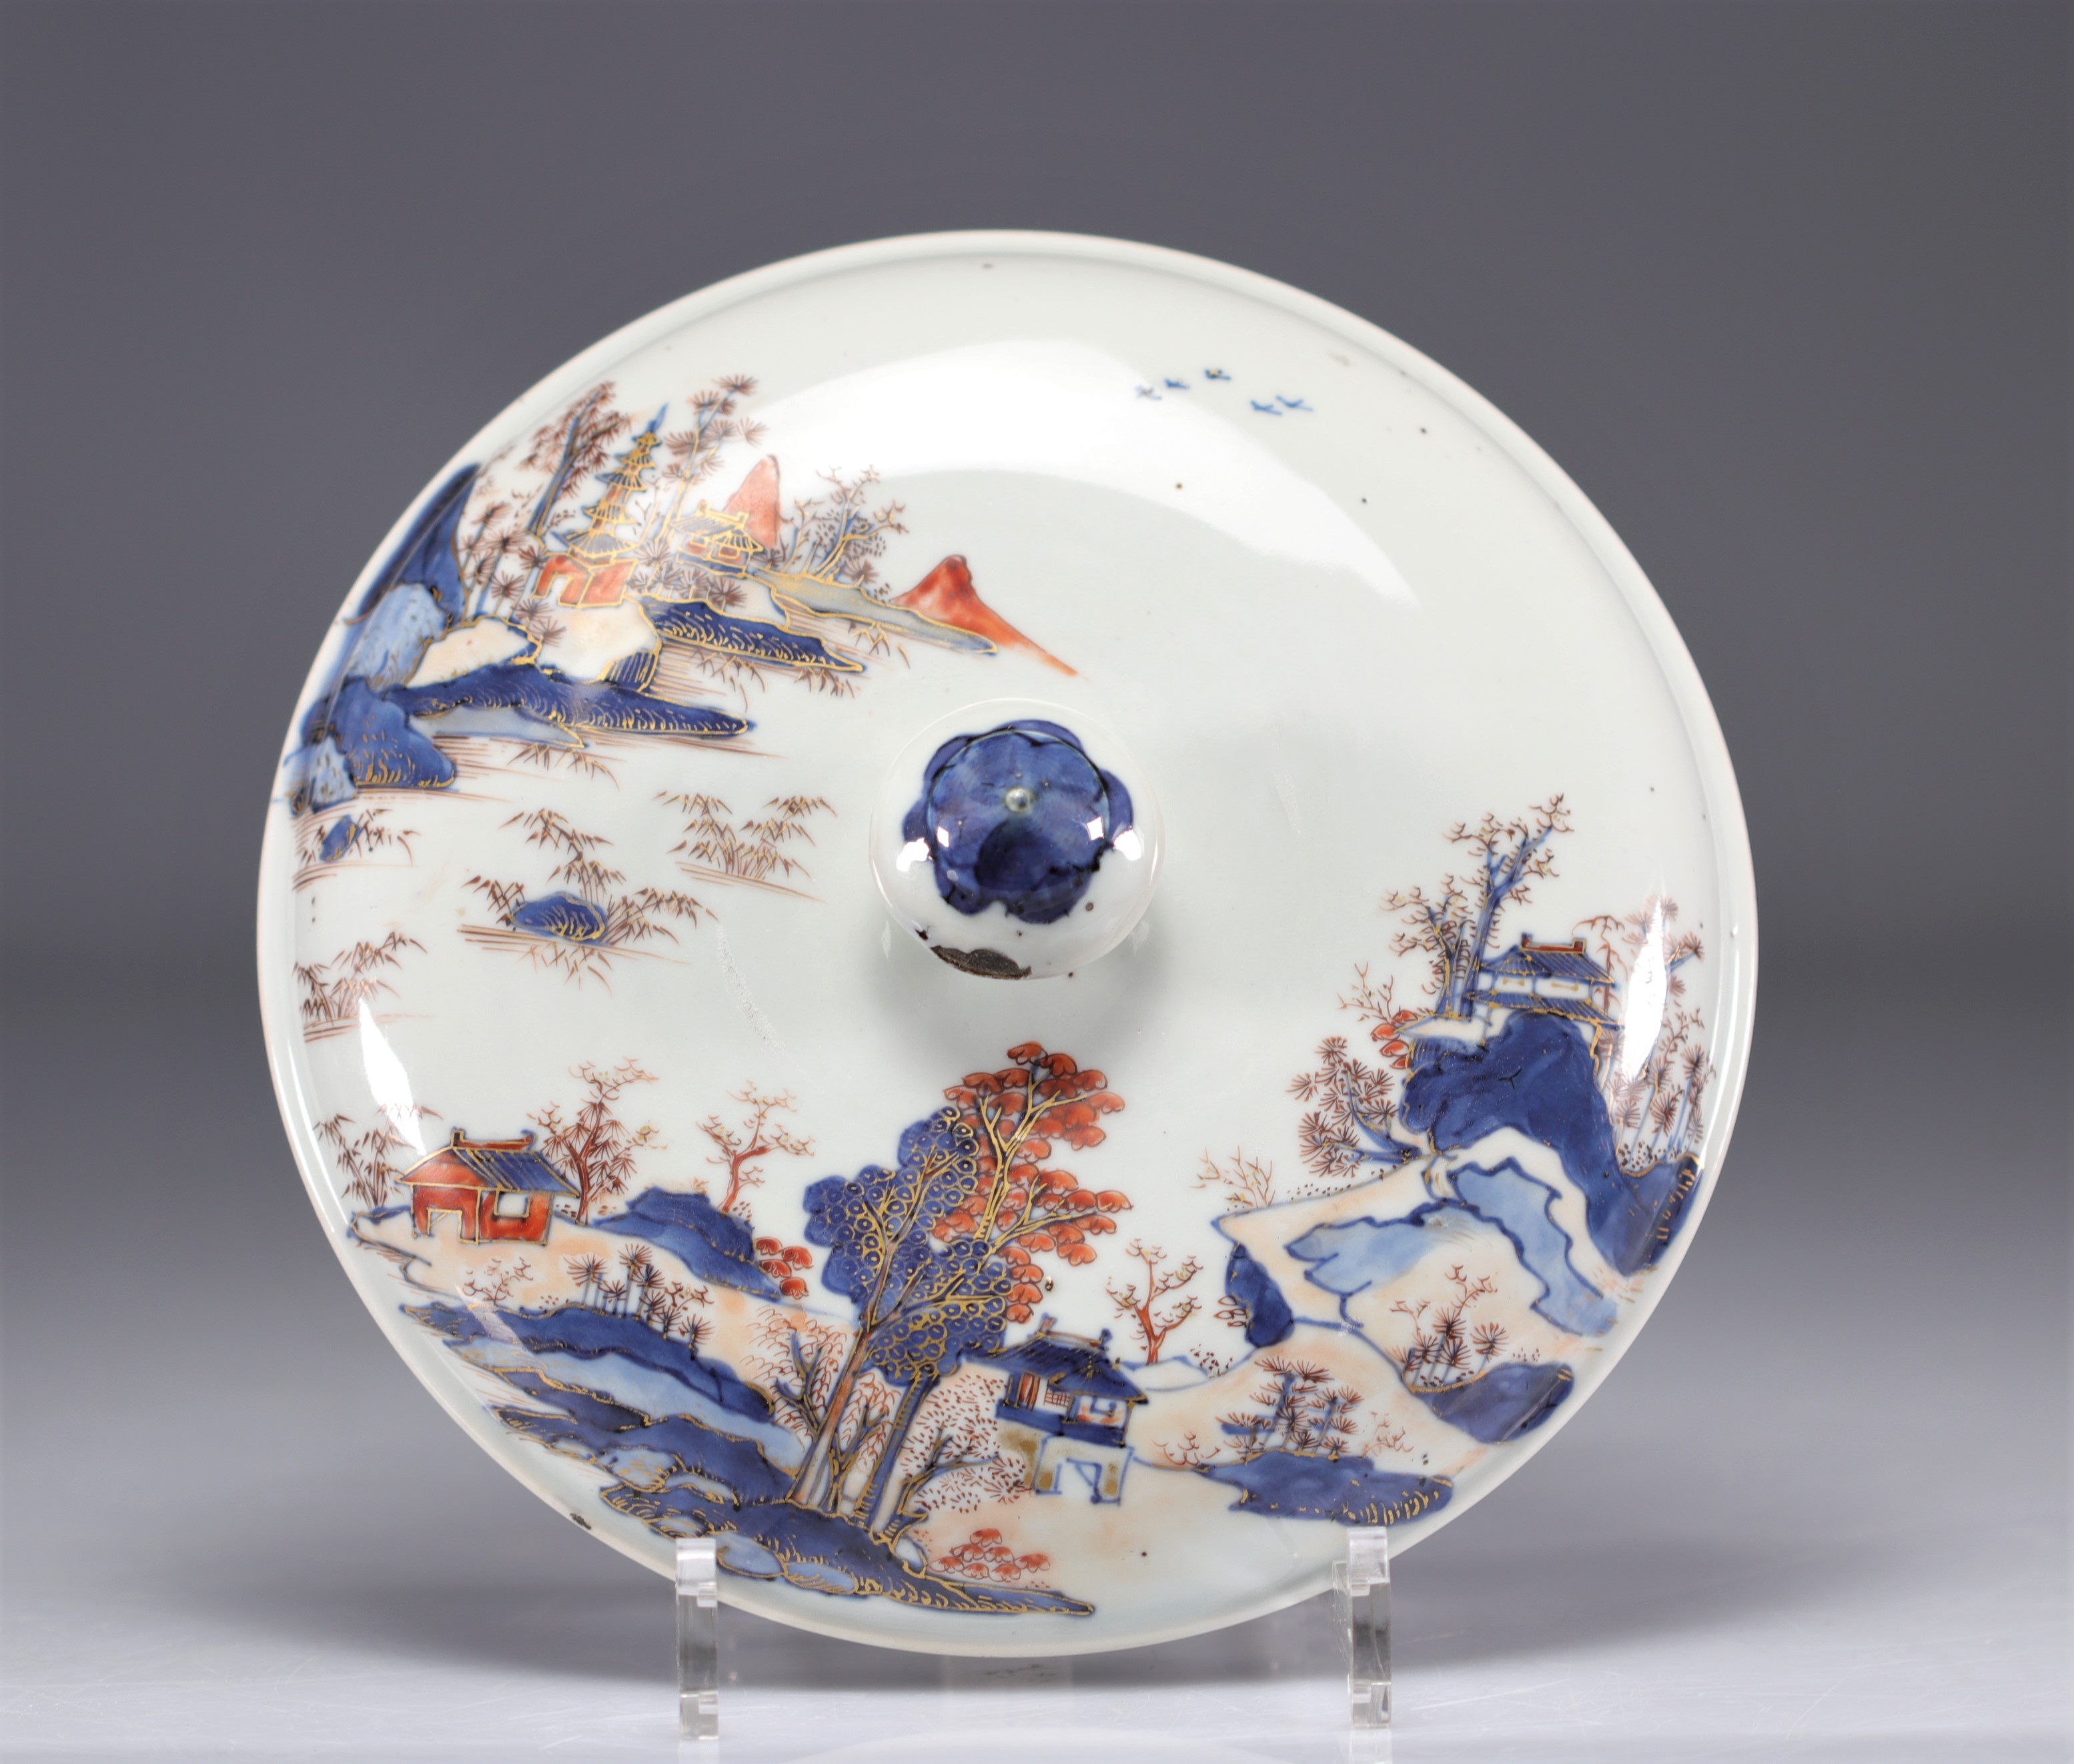 Covered dish in chinese porcelain decorated with landscapes on a white background from 18th century - Image 5 of 6